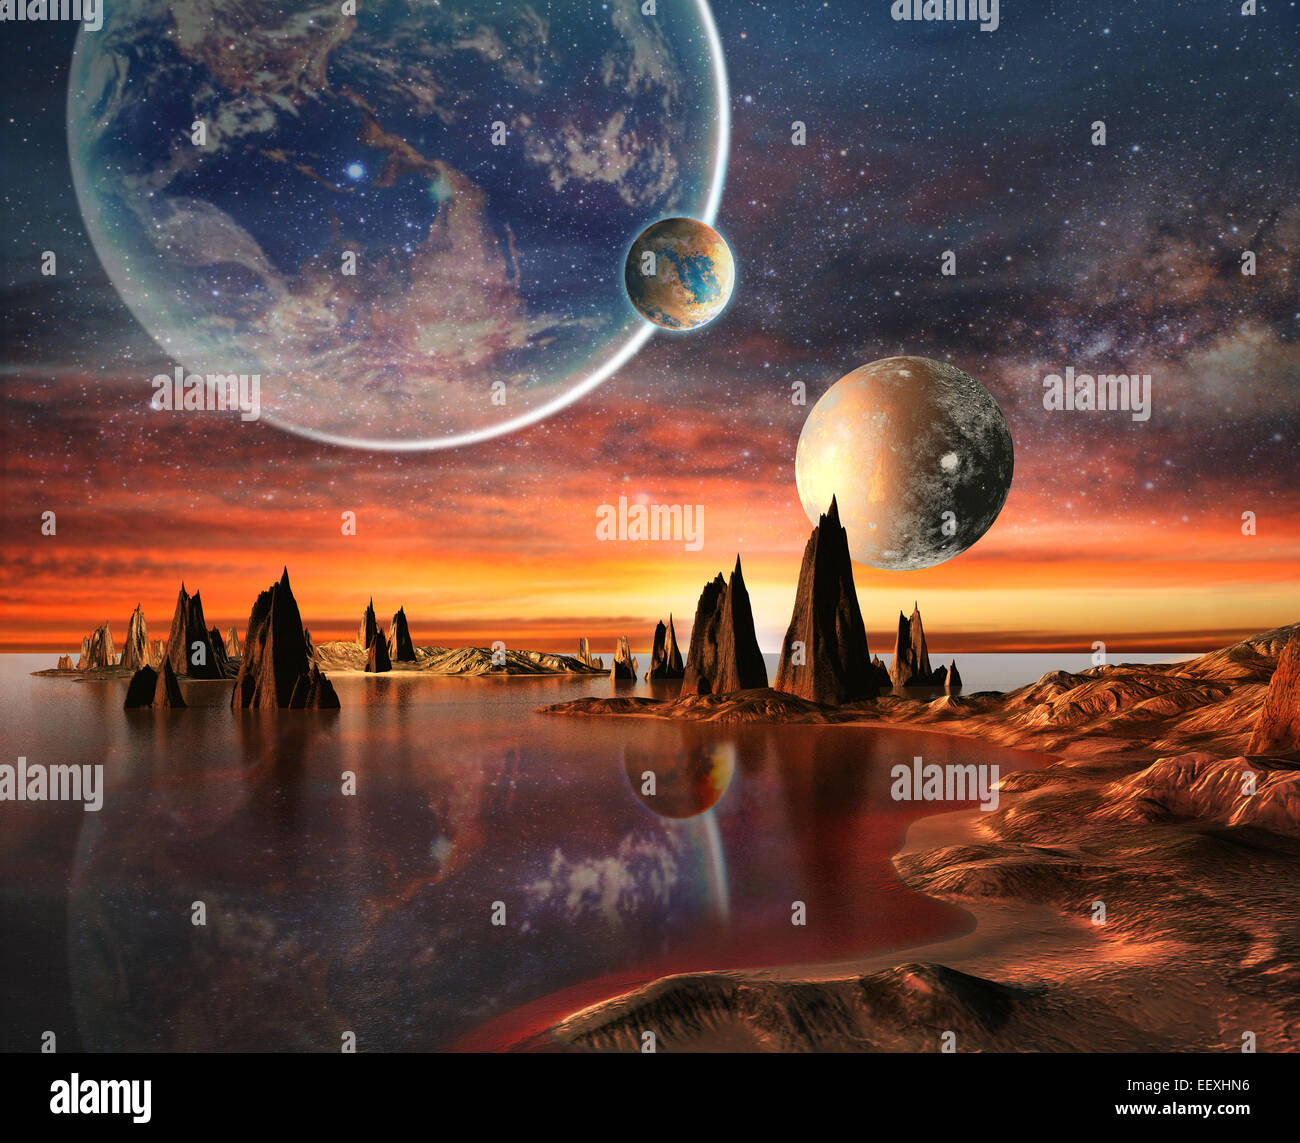 Alien Planet With Earth Moon And Mountains . Stock Photo